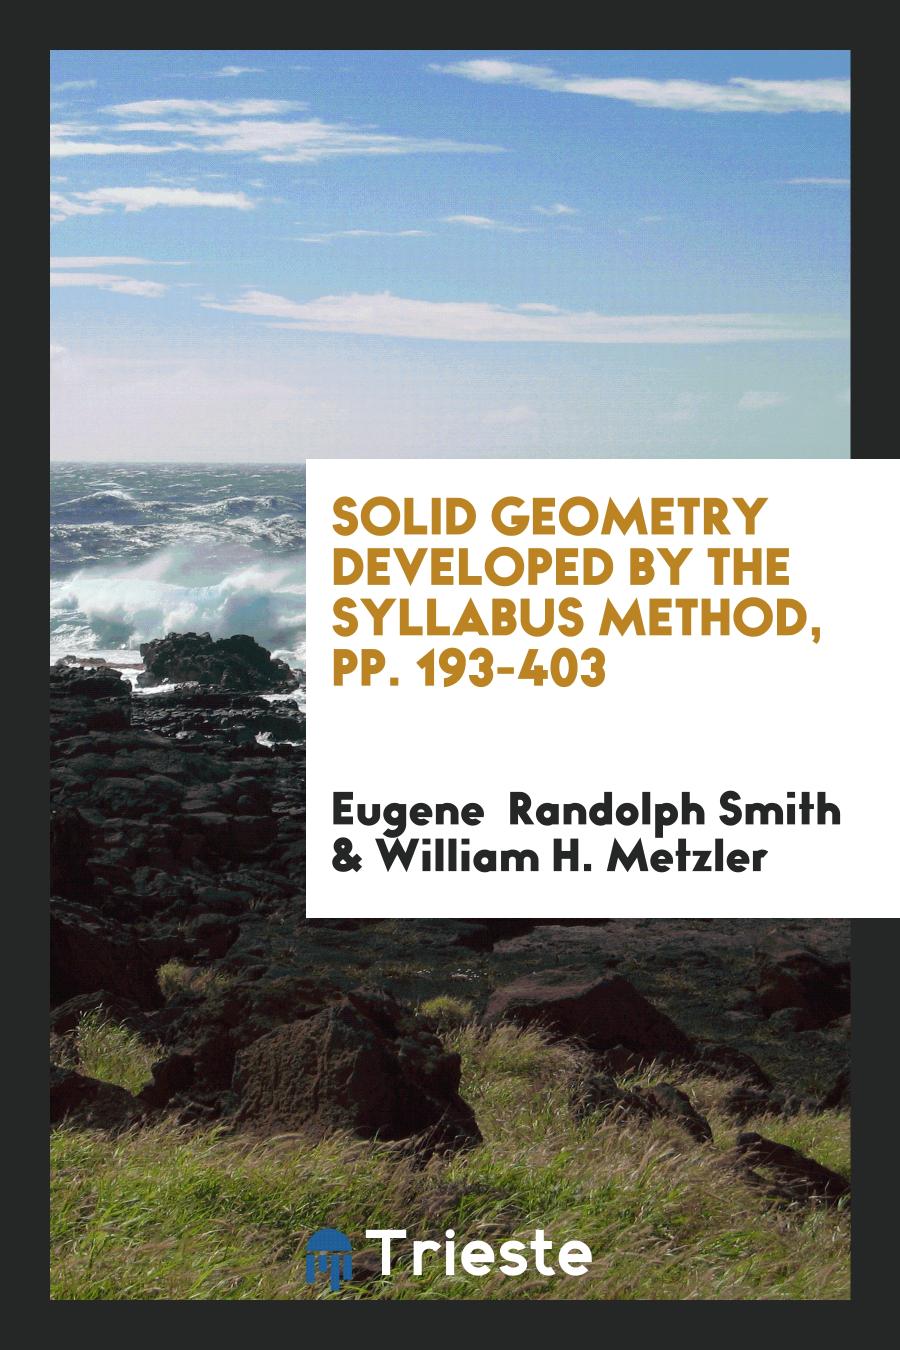 Solid Geometry Developed by the Syllabus Method, pp. 193-403